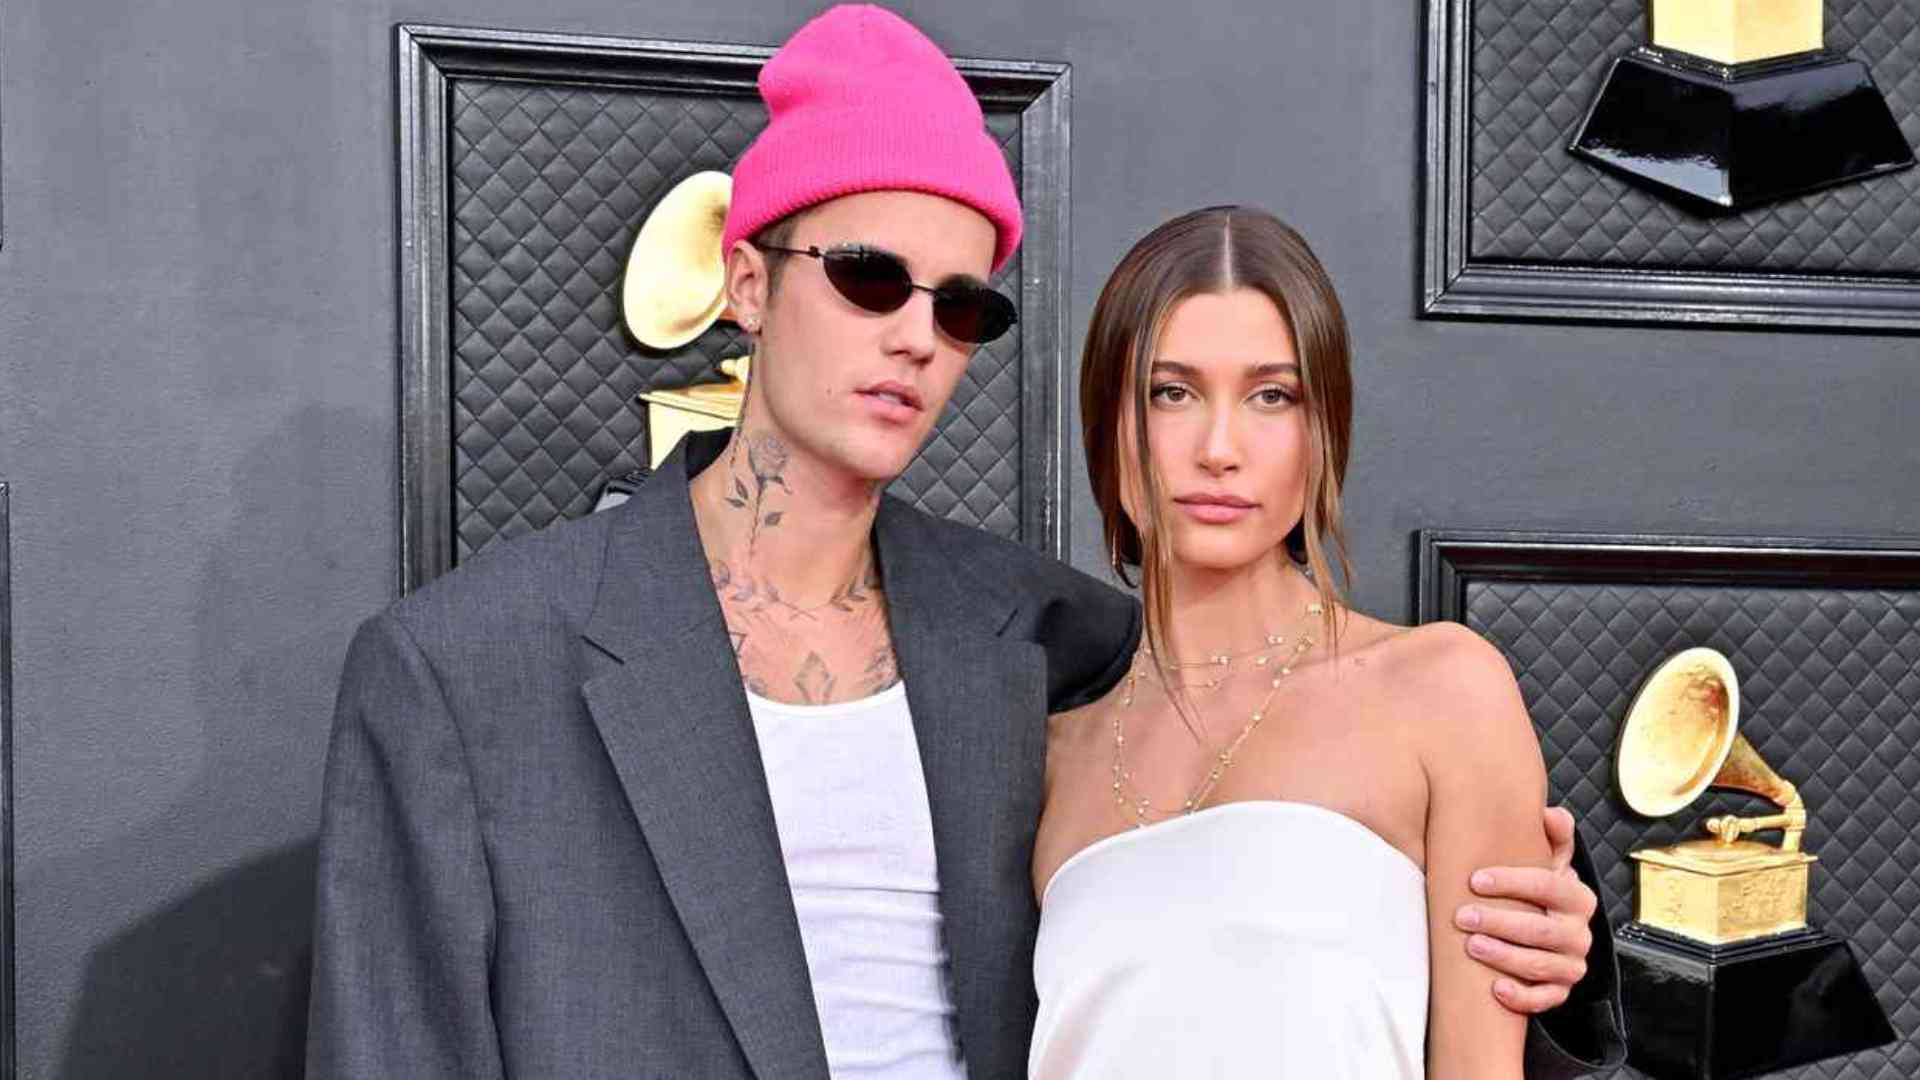 Hailey Bieber and Justin Bieber were seen together on Saturday night